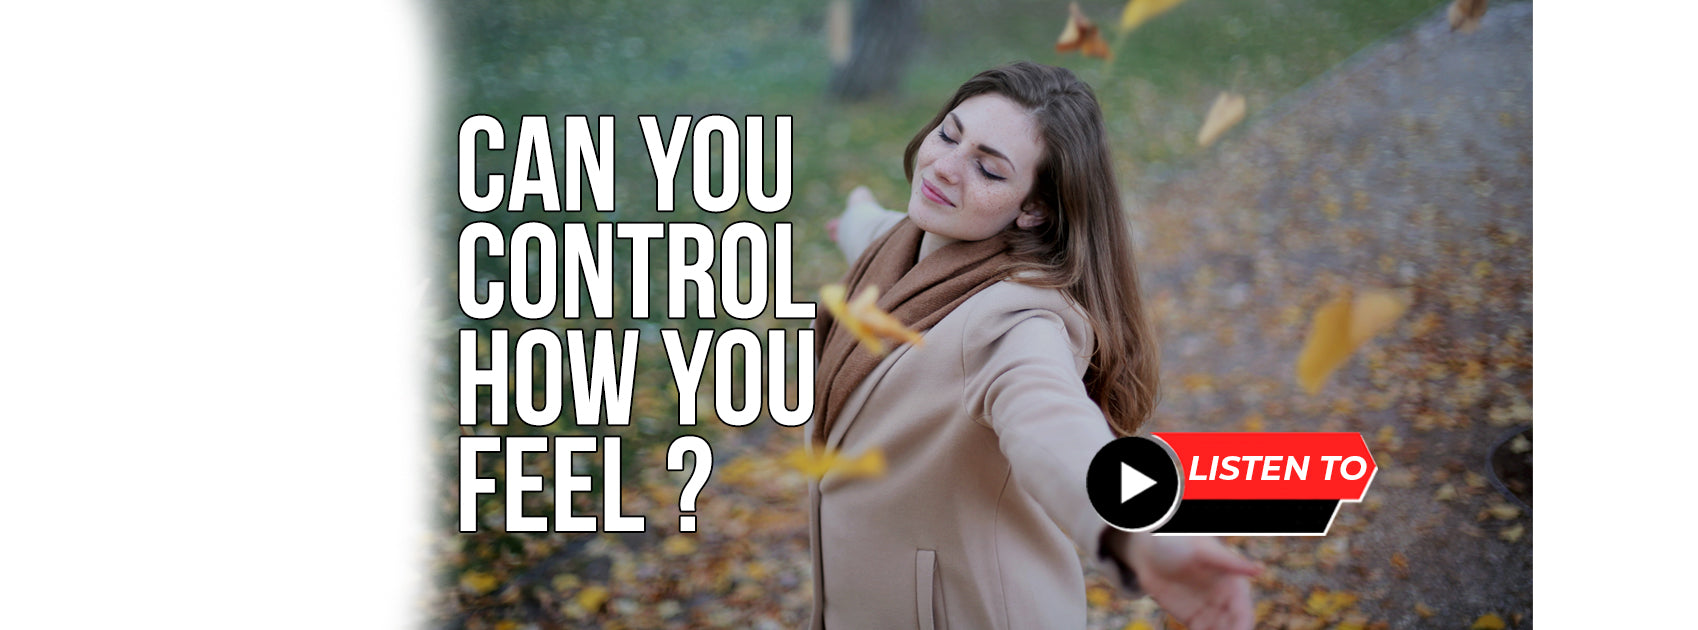 Can You Control How You Feel?